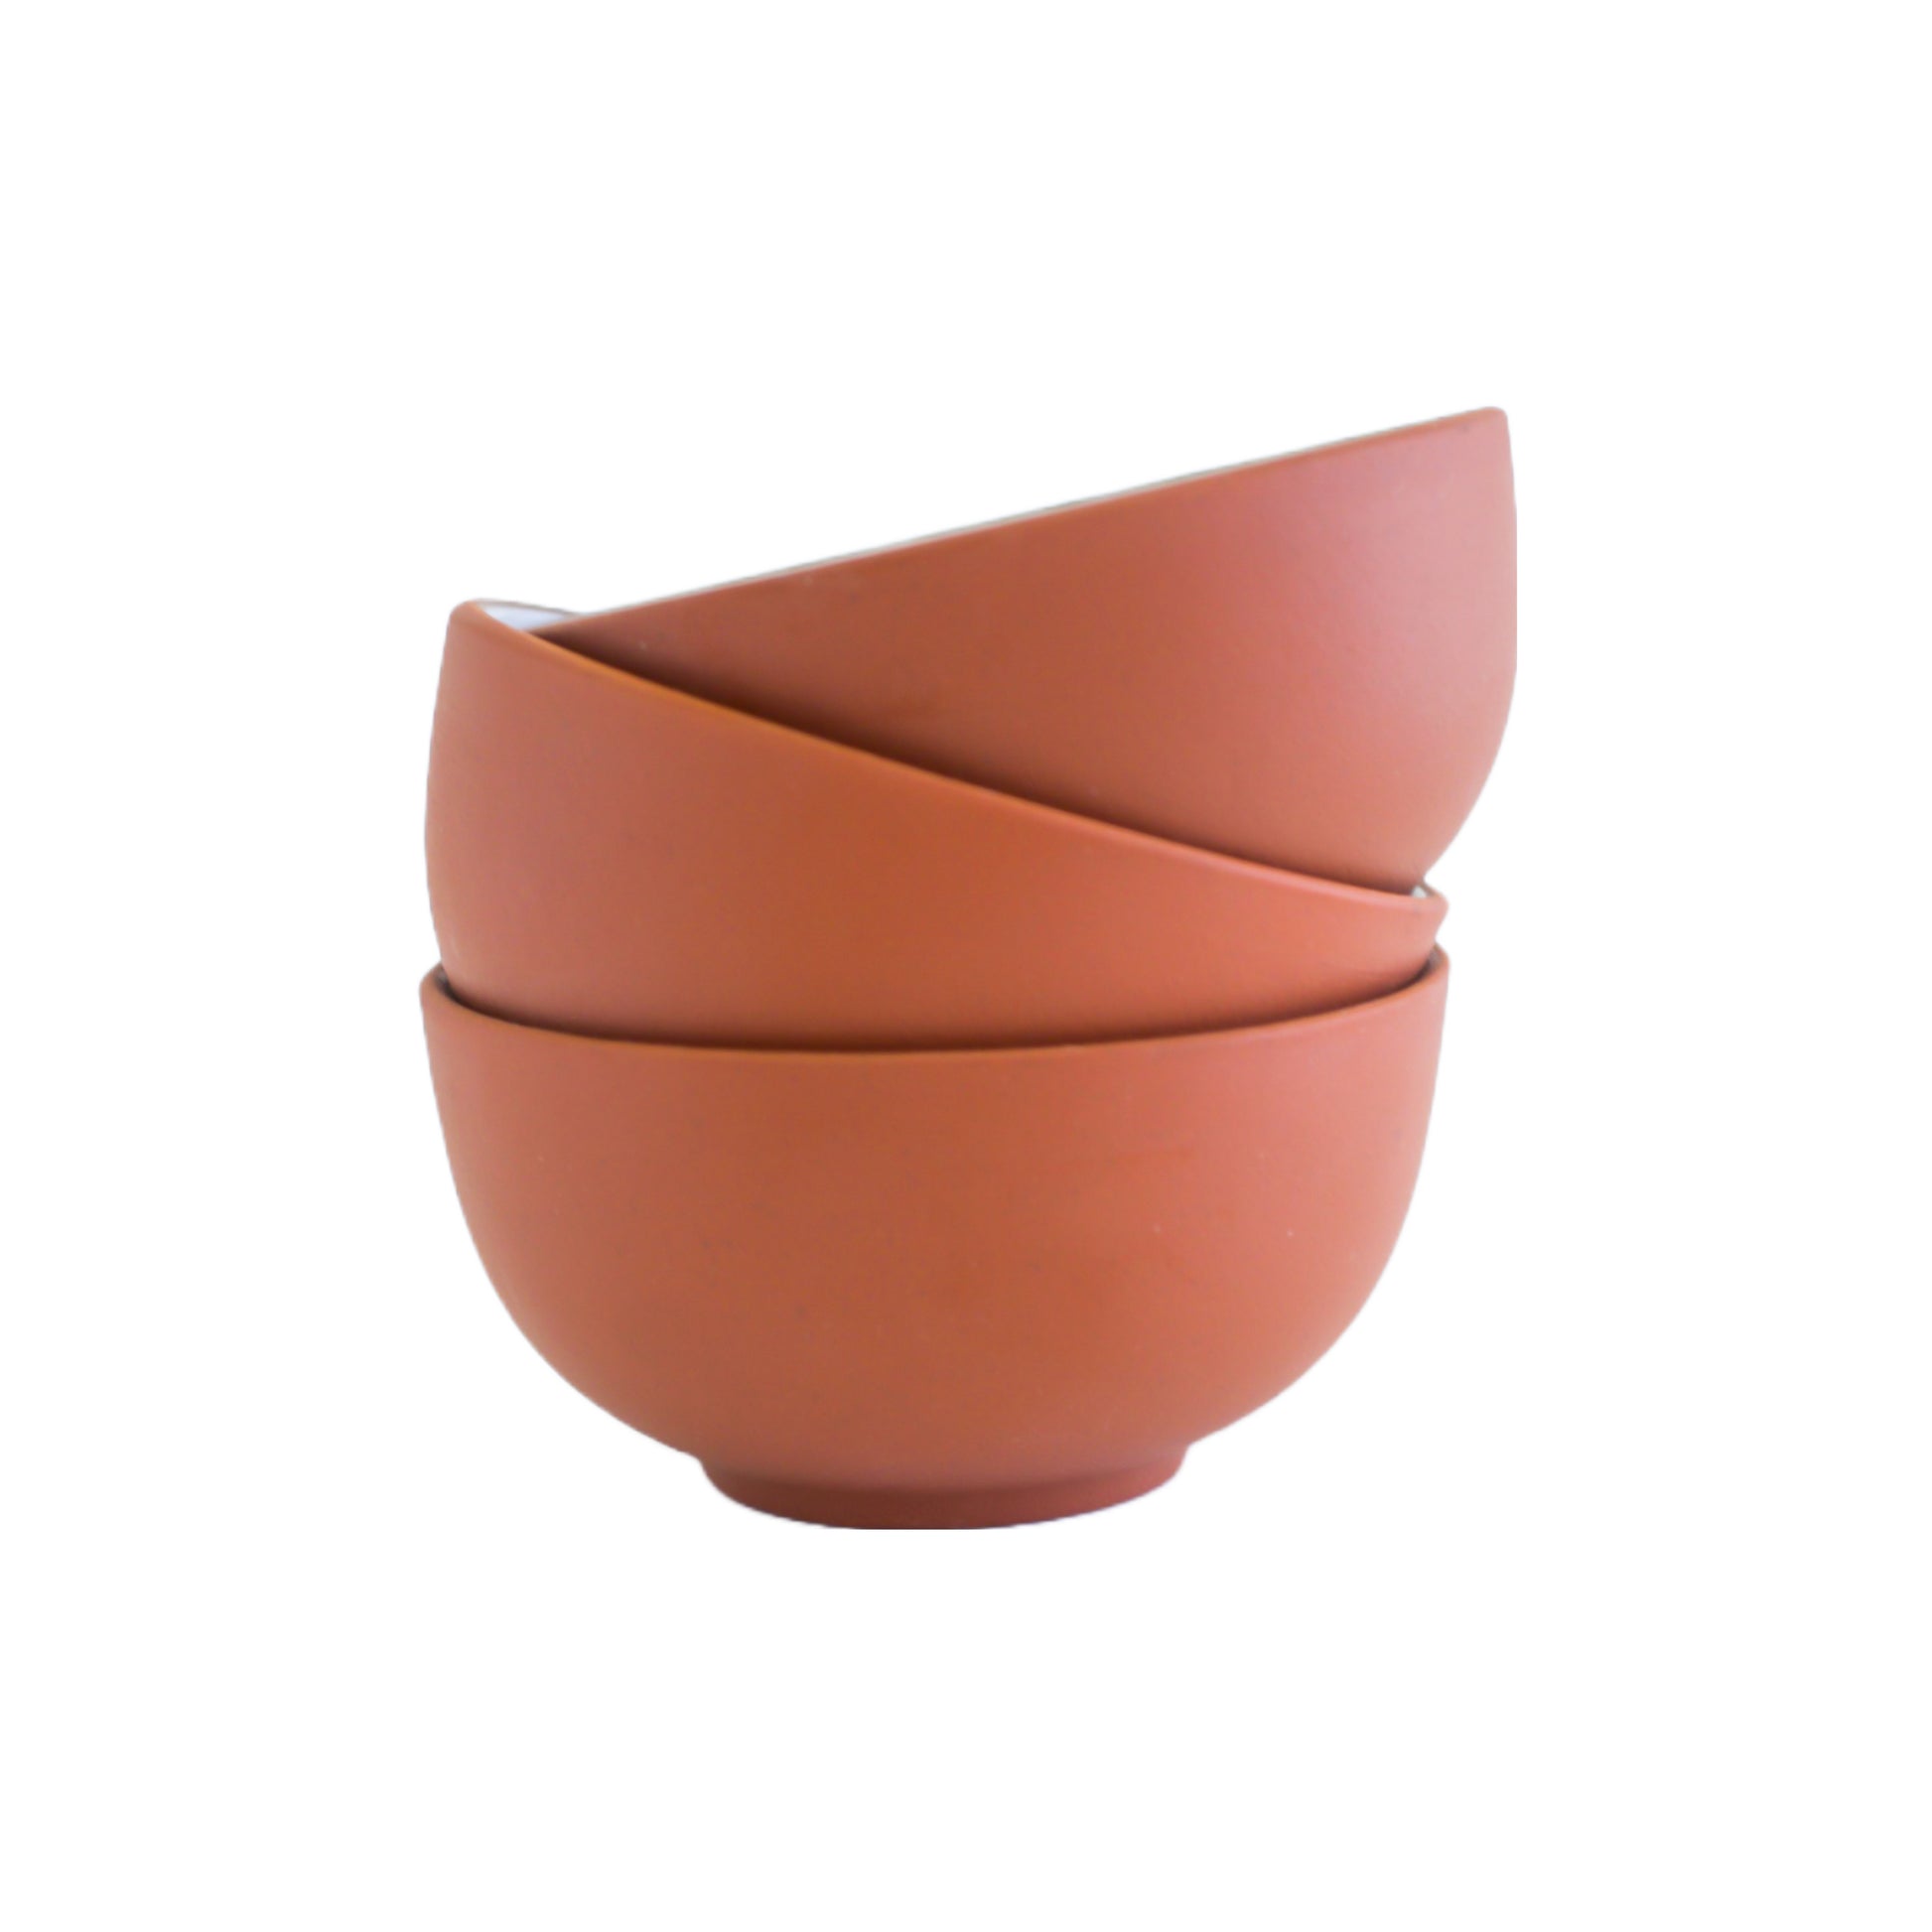 3 clay colored mini mixing bowls stacked